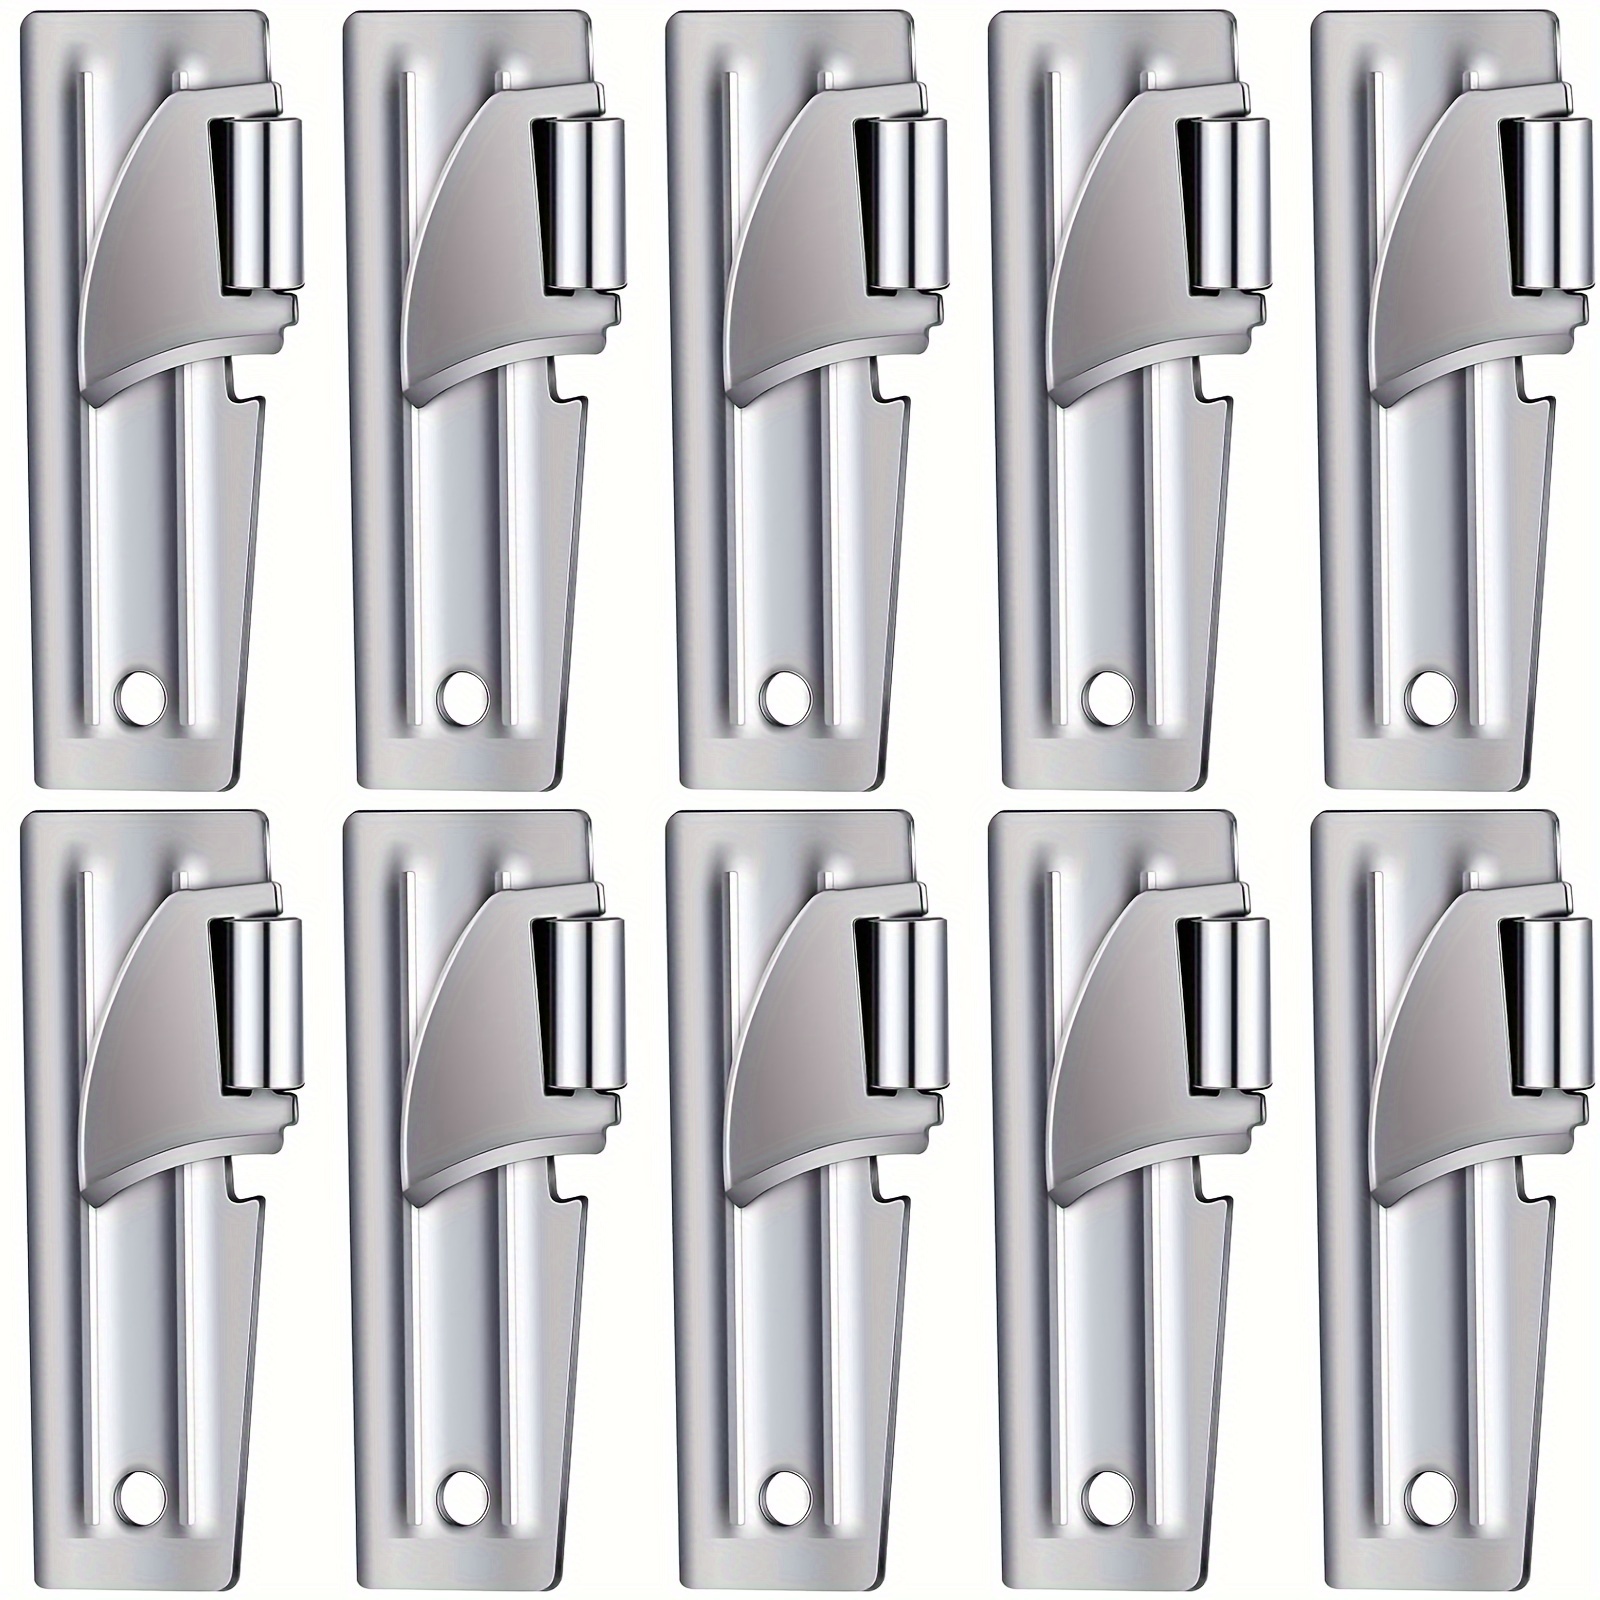 

10pcs/set, Can Opener, Camping Can Opener, Stainless Steel Military Can Opener, Survival Can Opener, Army Can Opener, Backpack Can Opener, Kitchen Gadgets, Cheap Items